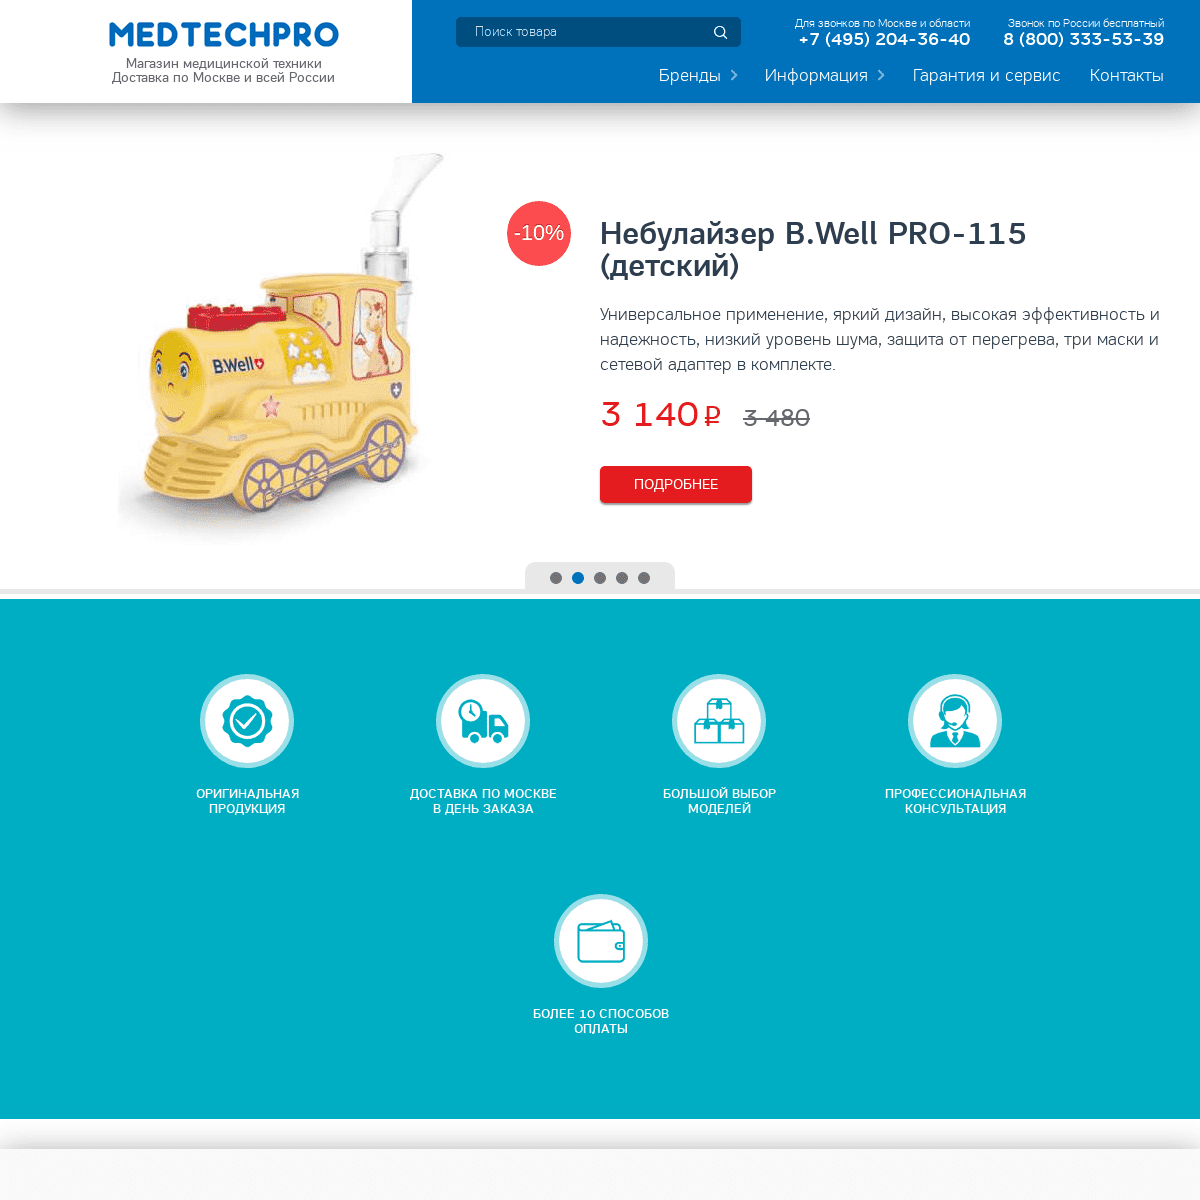 A complete backup of medtechpro.ru